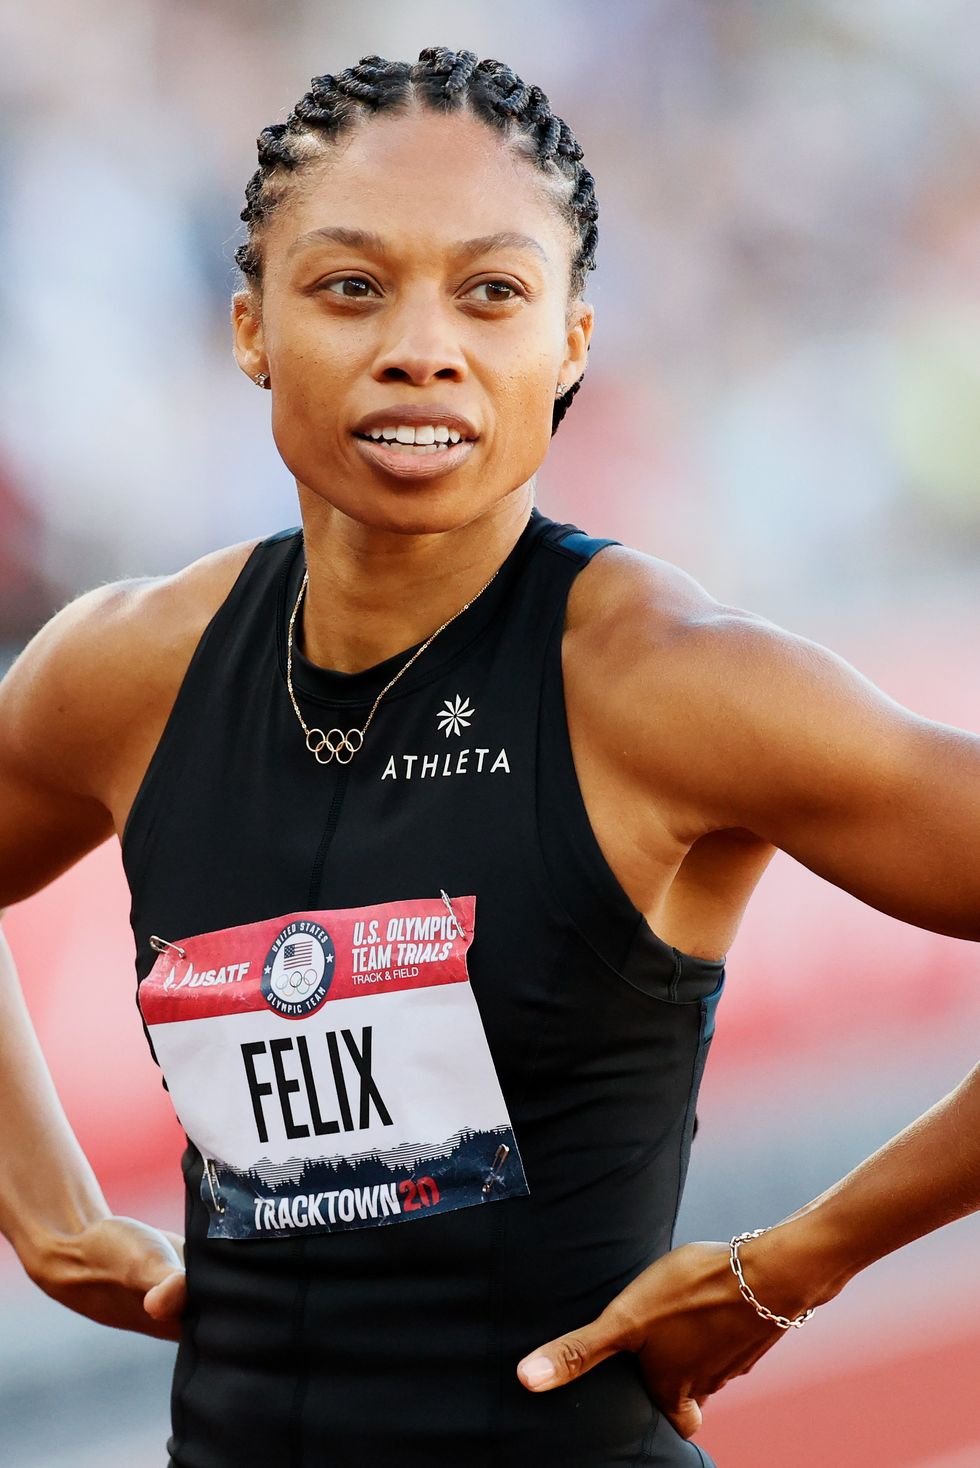 25 Hottest Female Track and Field Athletes